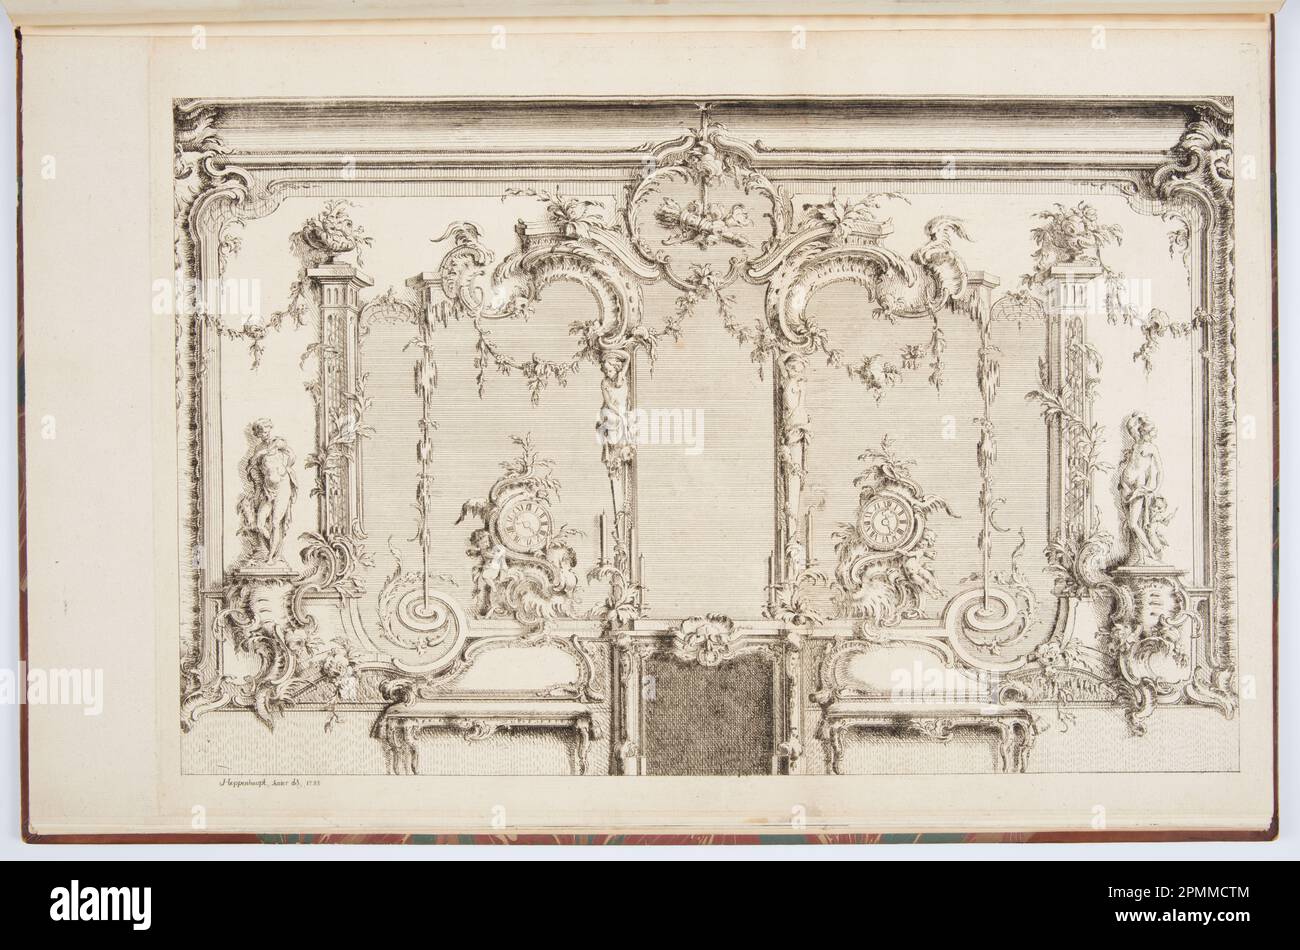 Print, Elevation of an Interior with Chimneypiece; Designed by Johann Michael Hoppenhaupt II (German, 1709–ca. 1778); Print Maker: I. W. Meil (German); Germany; etching and engraving on white laid paper tipped into cream laid paper; Sheet: 40.6 x 64.3 cm (16 in. x 25 5/16 in.) Platemark: 39.8 x 57.2 cm (15 11/16 x 22 1/2 in.), irregular Stock Photo